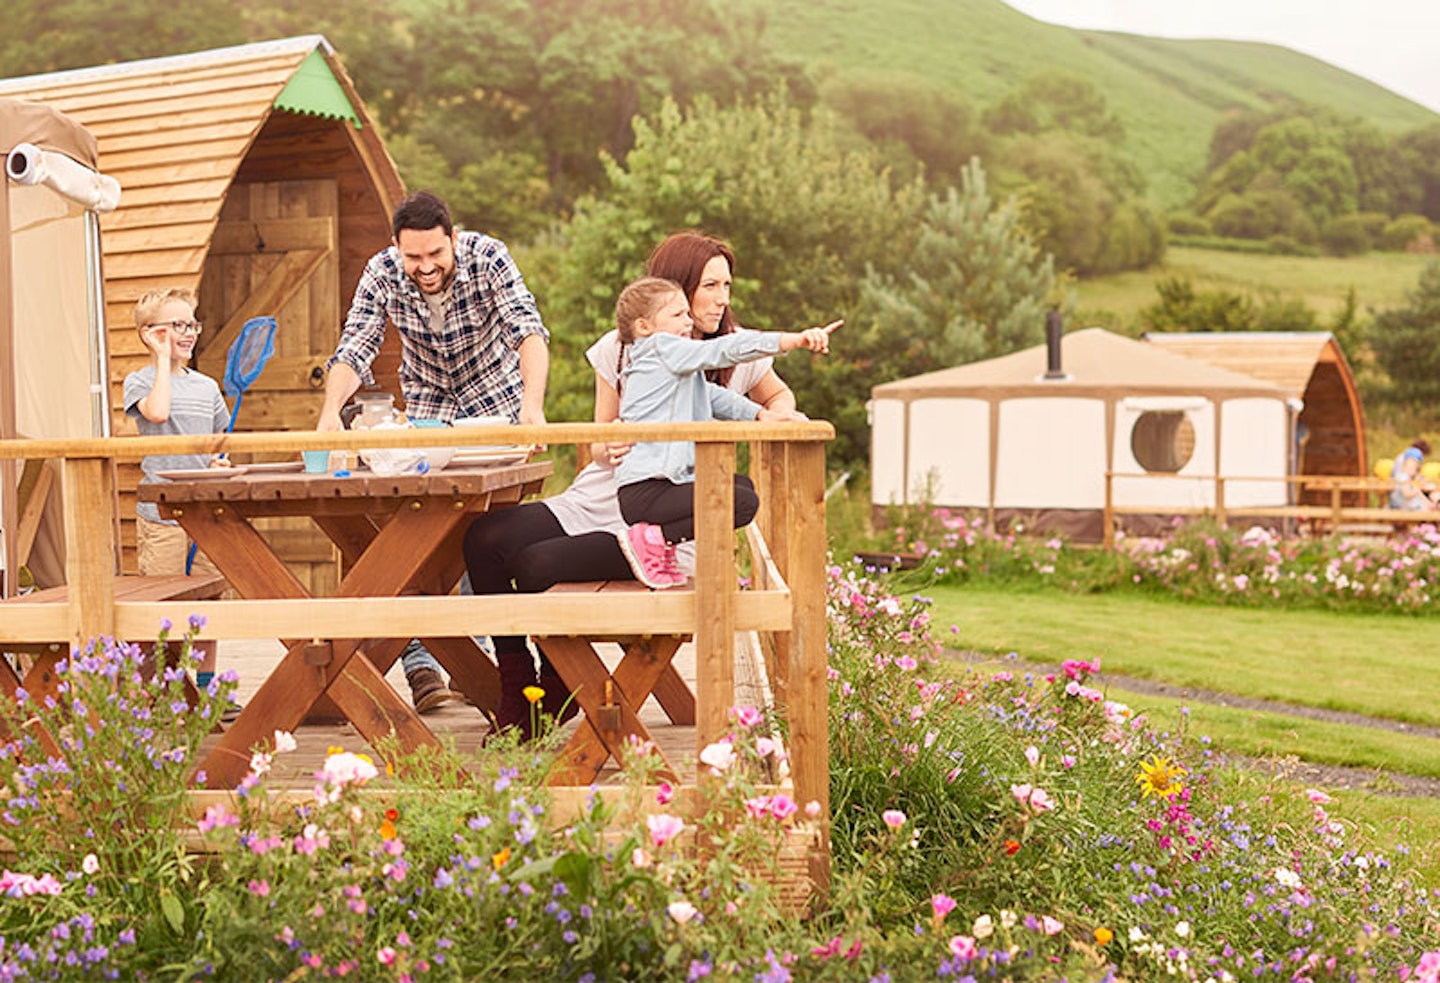 The best family holiday parks in the UK